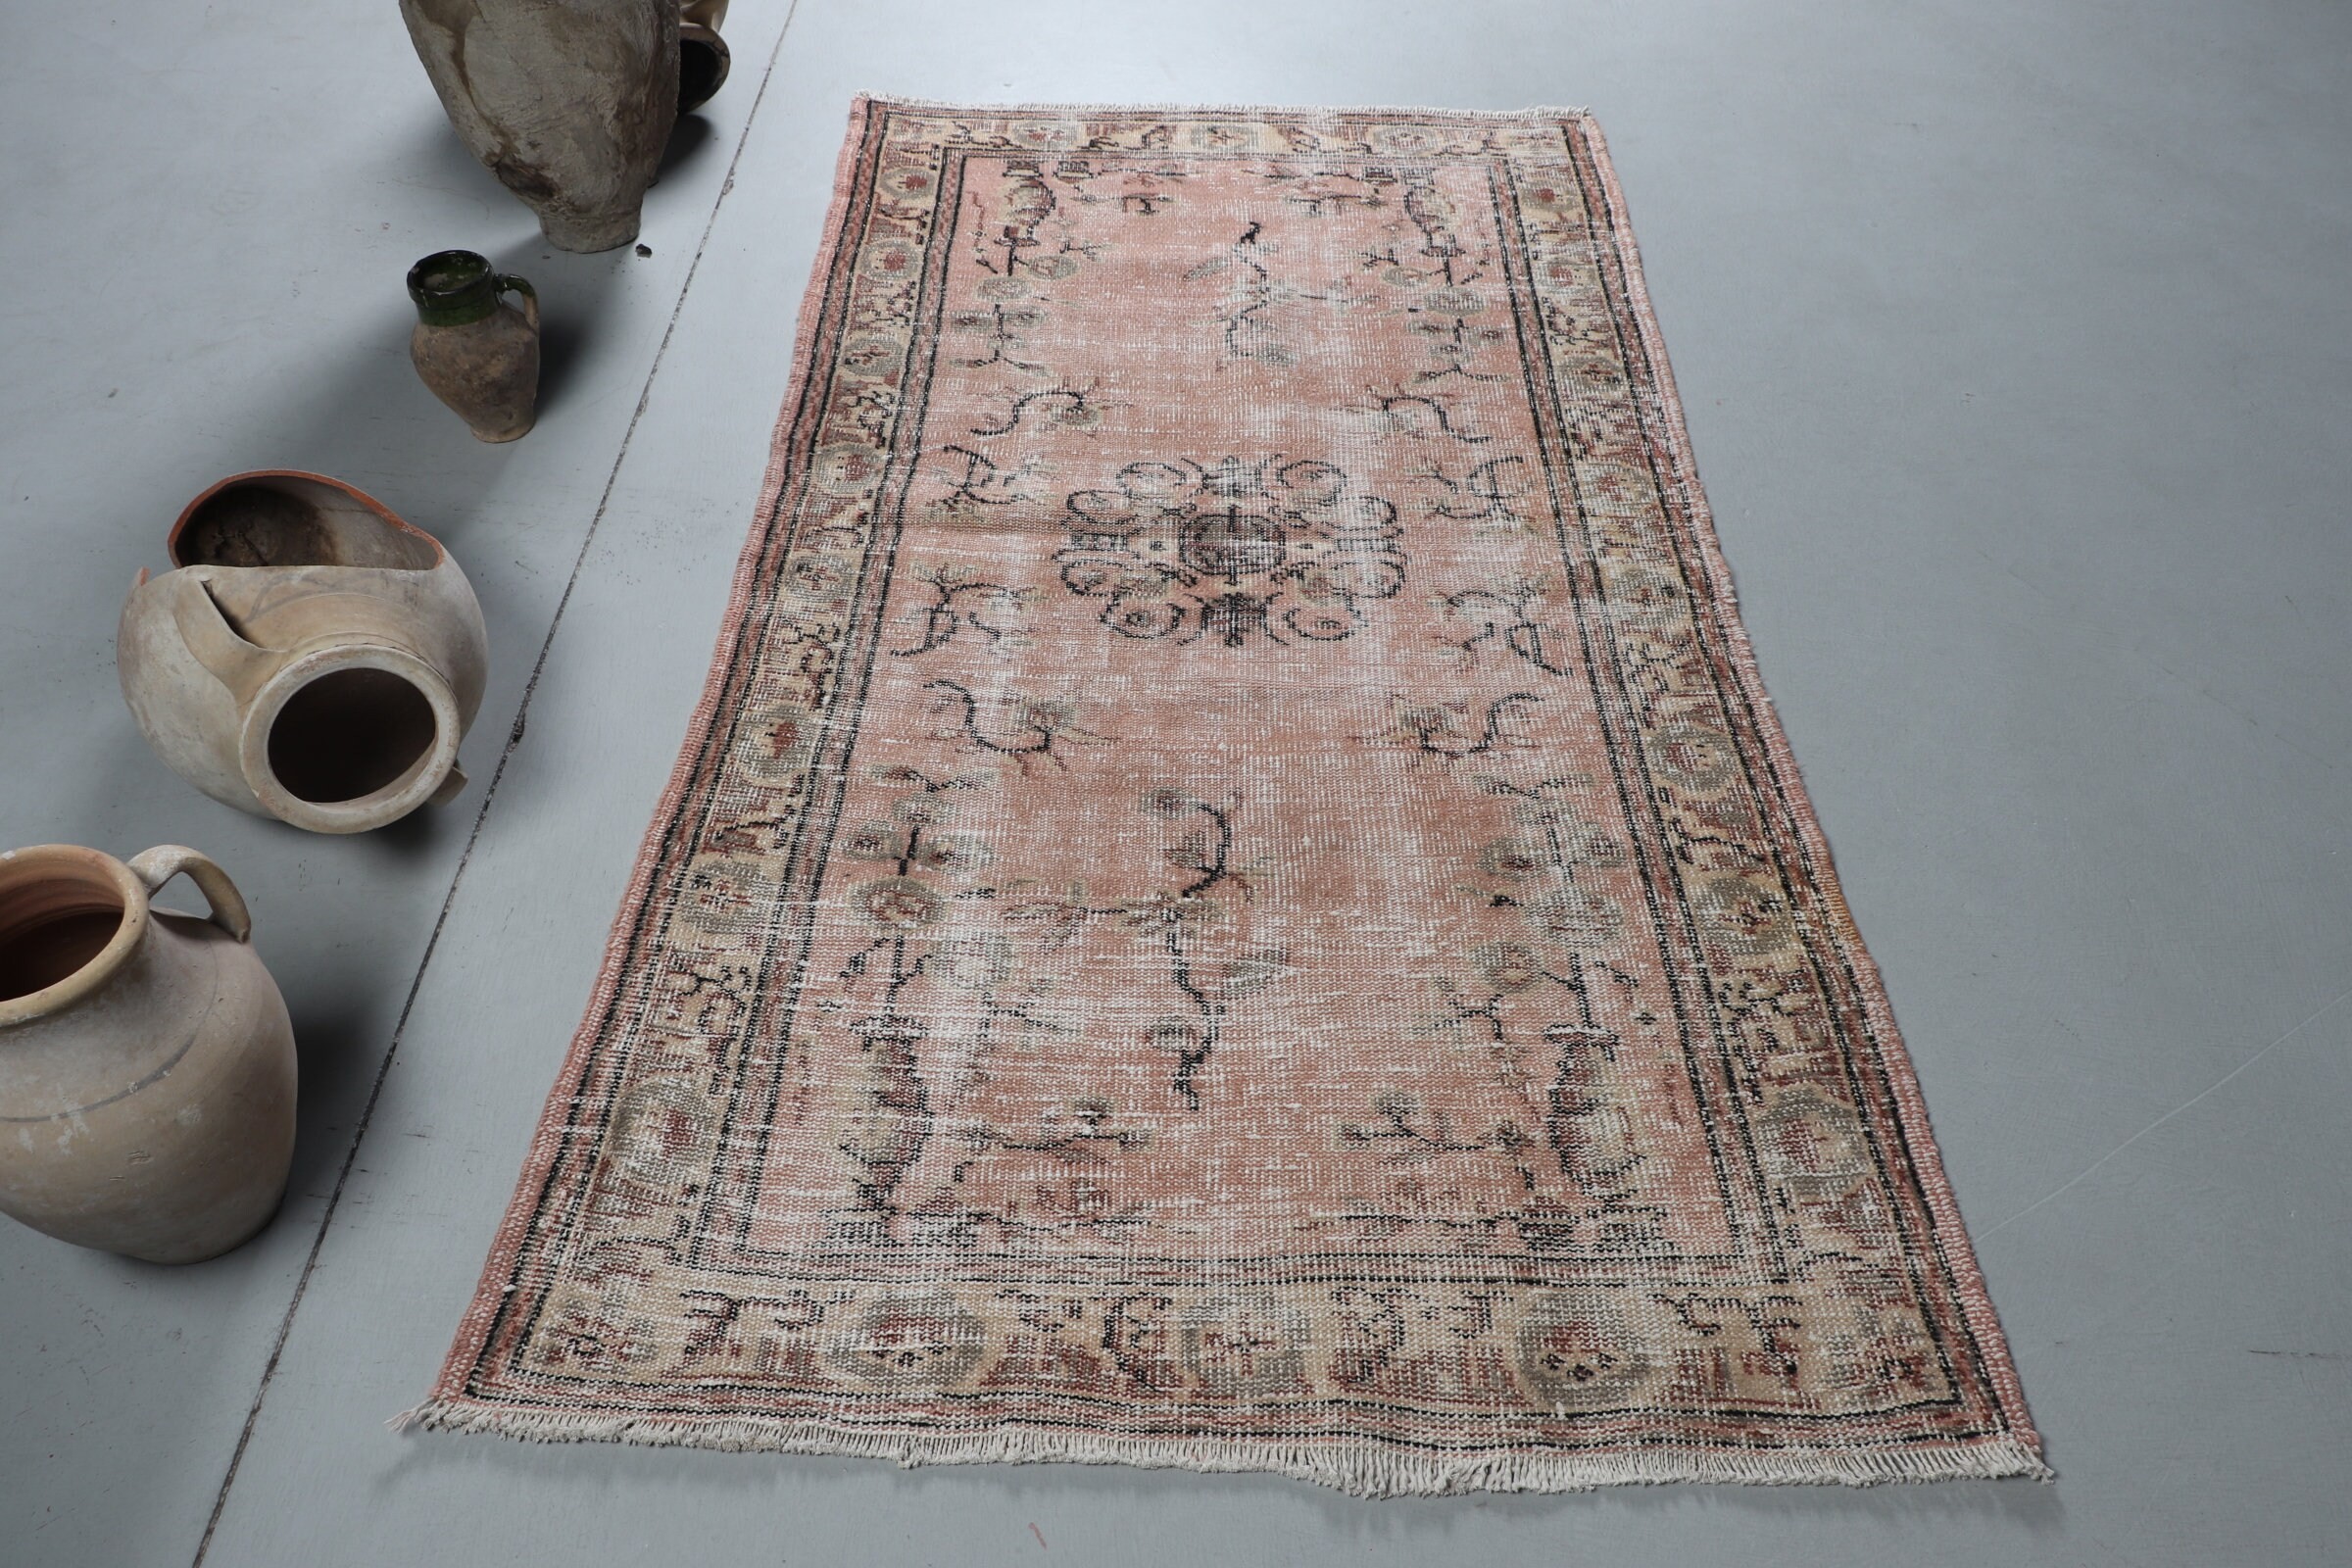 Bronze Floor Rugs, Vintage Rug, Rugs for Bedroom, Turkish Rug, 3.5x6.4 ft Accent Rug, Home Decor Rugs, Kitchen Rug, Wool Rug, Entry Rugs